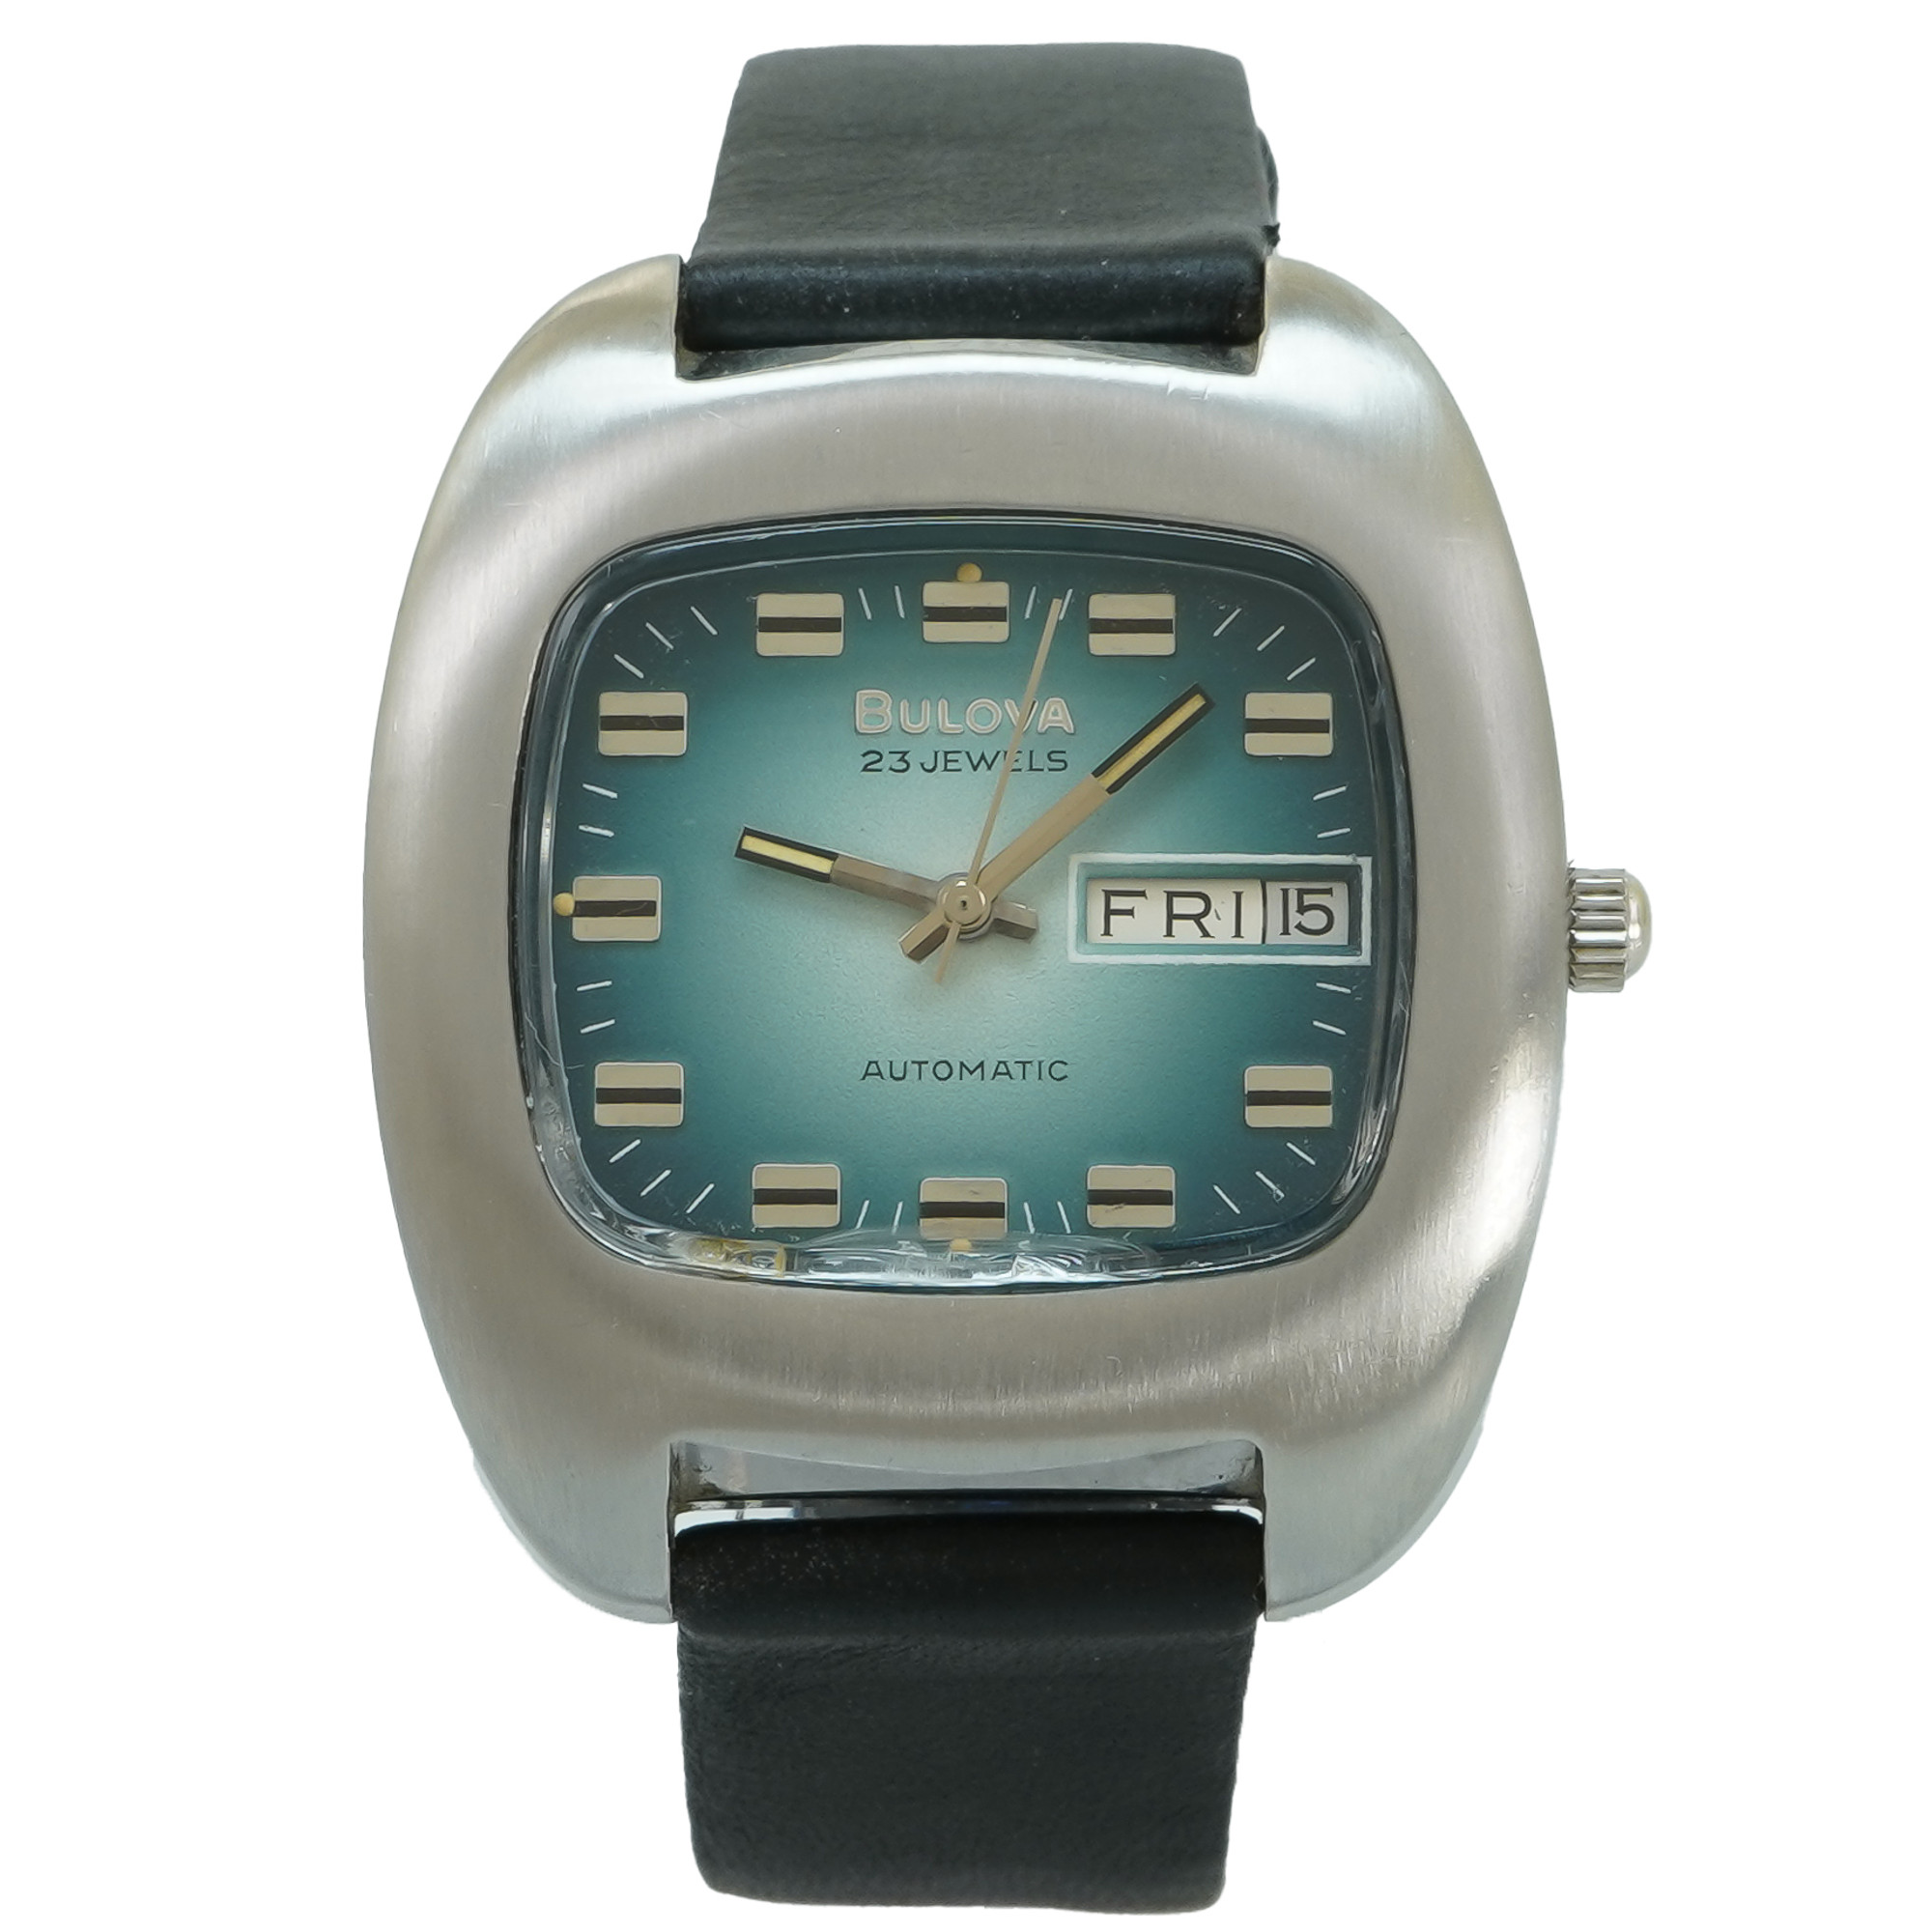 Bulova Cushion Case with Teal Dial Automatic Day Date *Vintage* - Inventory 4048